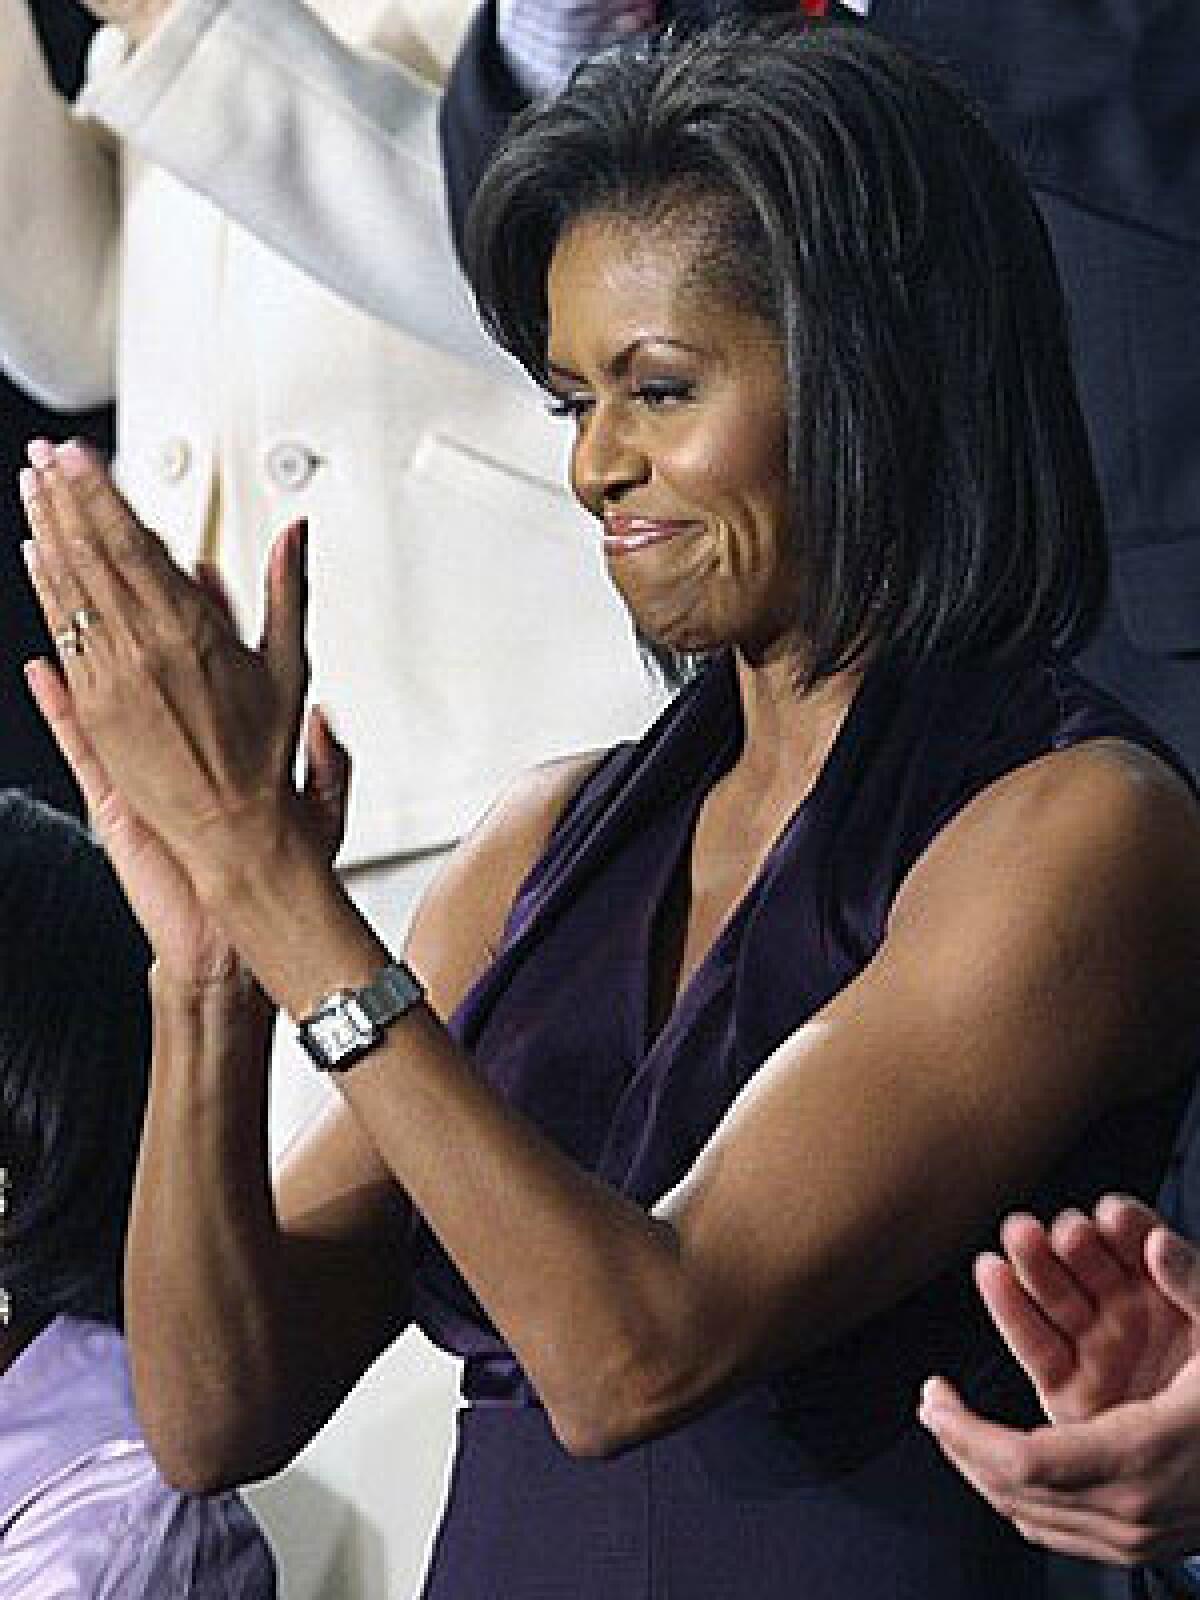 Michelle Obama's toned arms are debated - Los Angeles Times